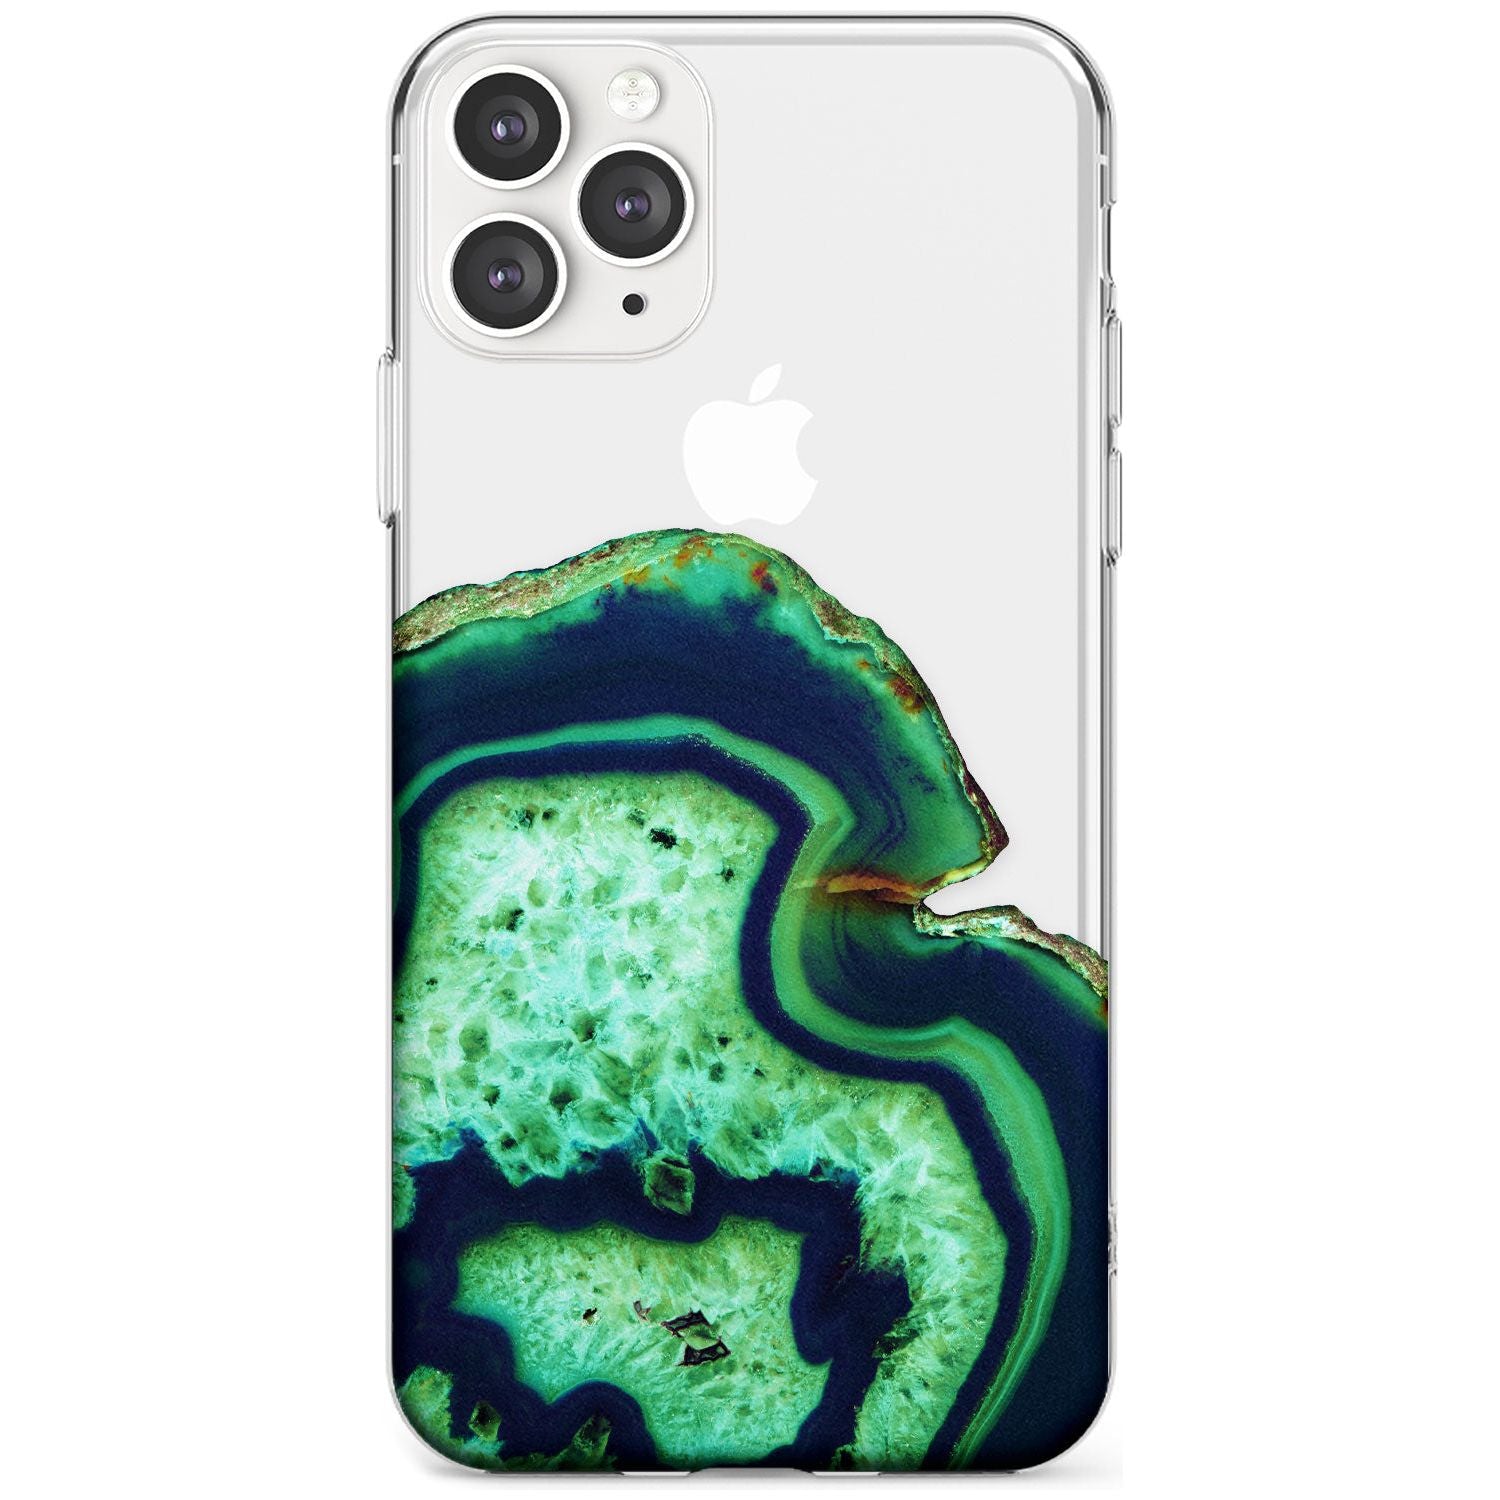 Neon Green & Blue Agate Crystal Transparent Design Slim TPU Phone Case for iPhone 11 Pro Max